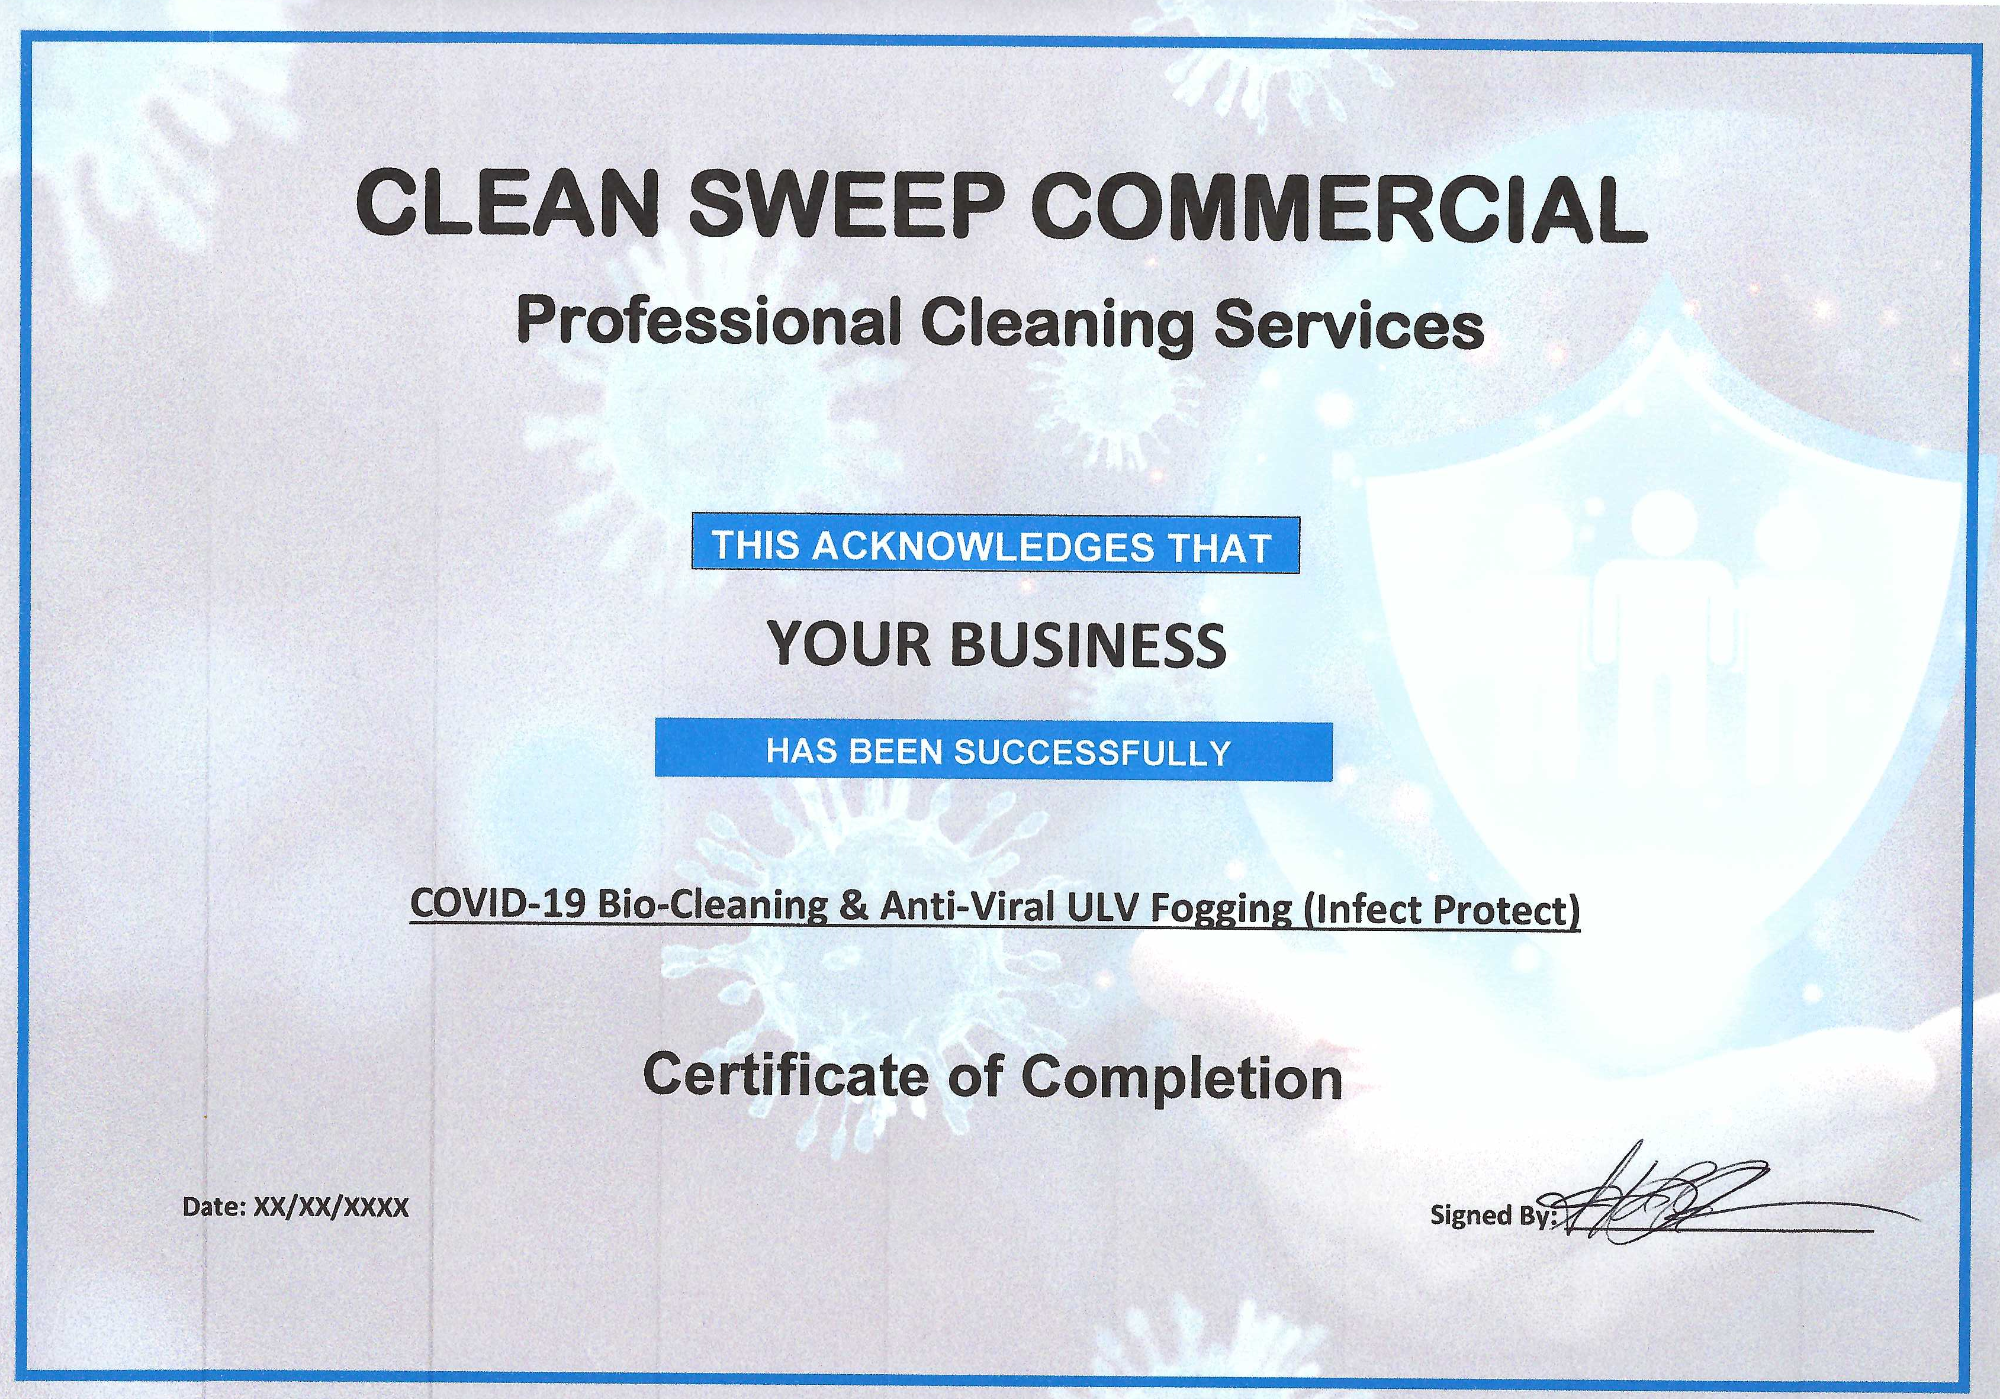 cleansweep-commercial-certificate-completition-gainsborough